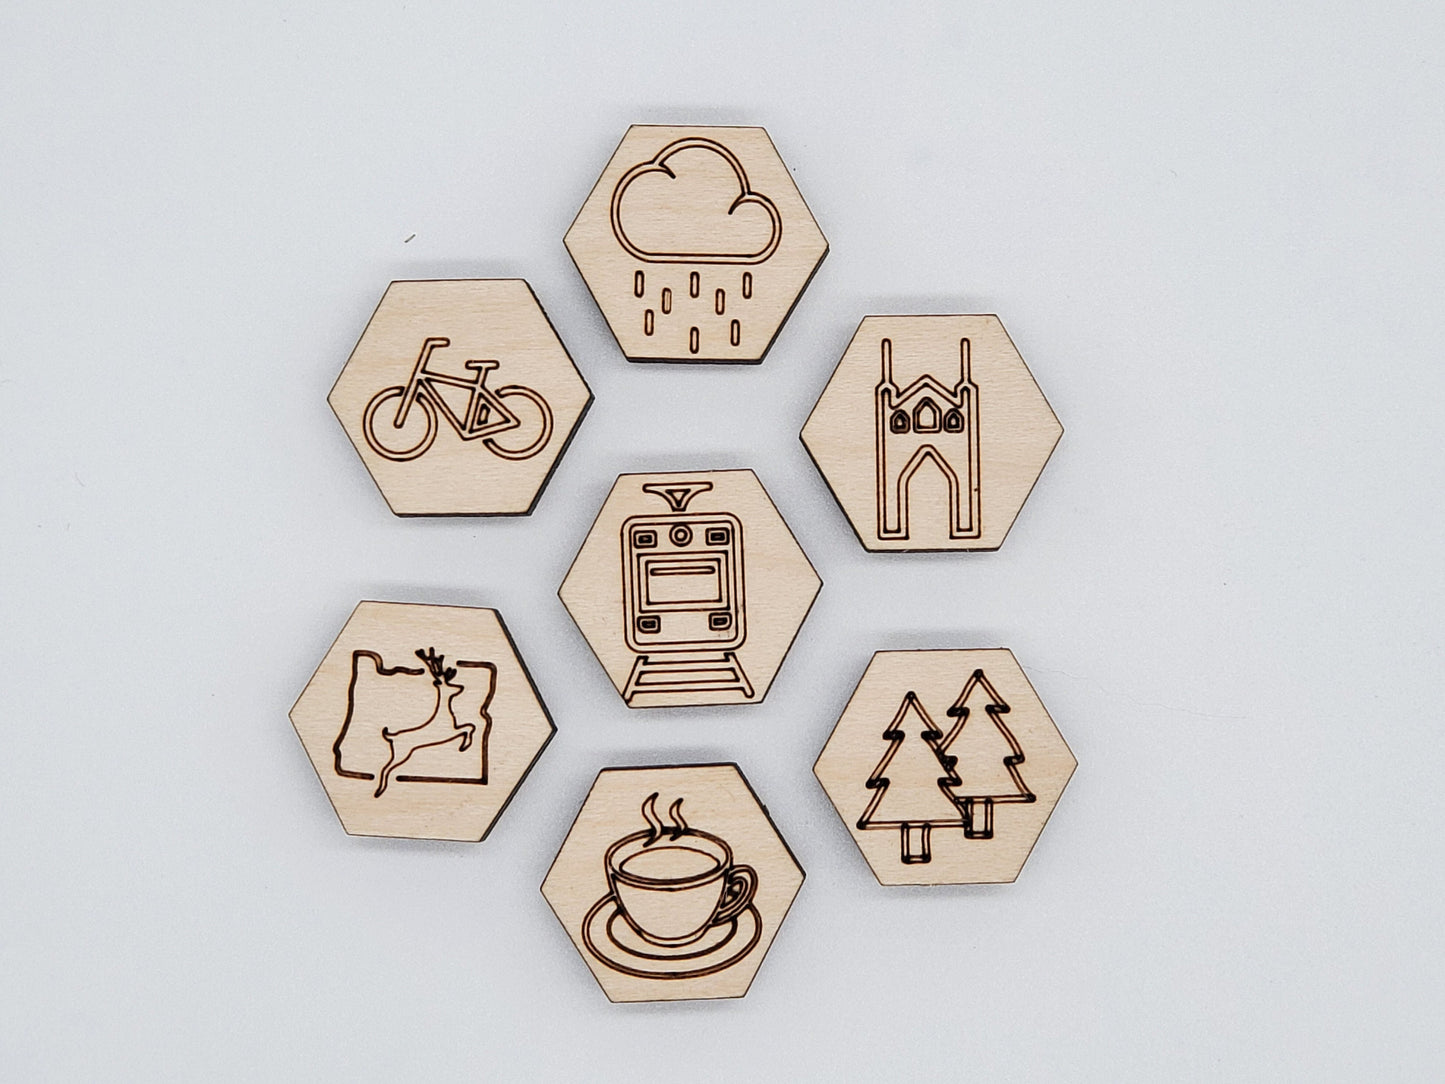 Portland Magnets, Small Wood Magnets with Pictures Representing Portland, Oregon